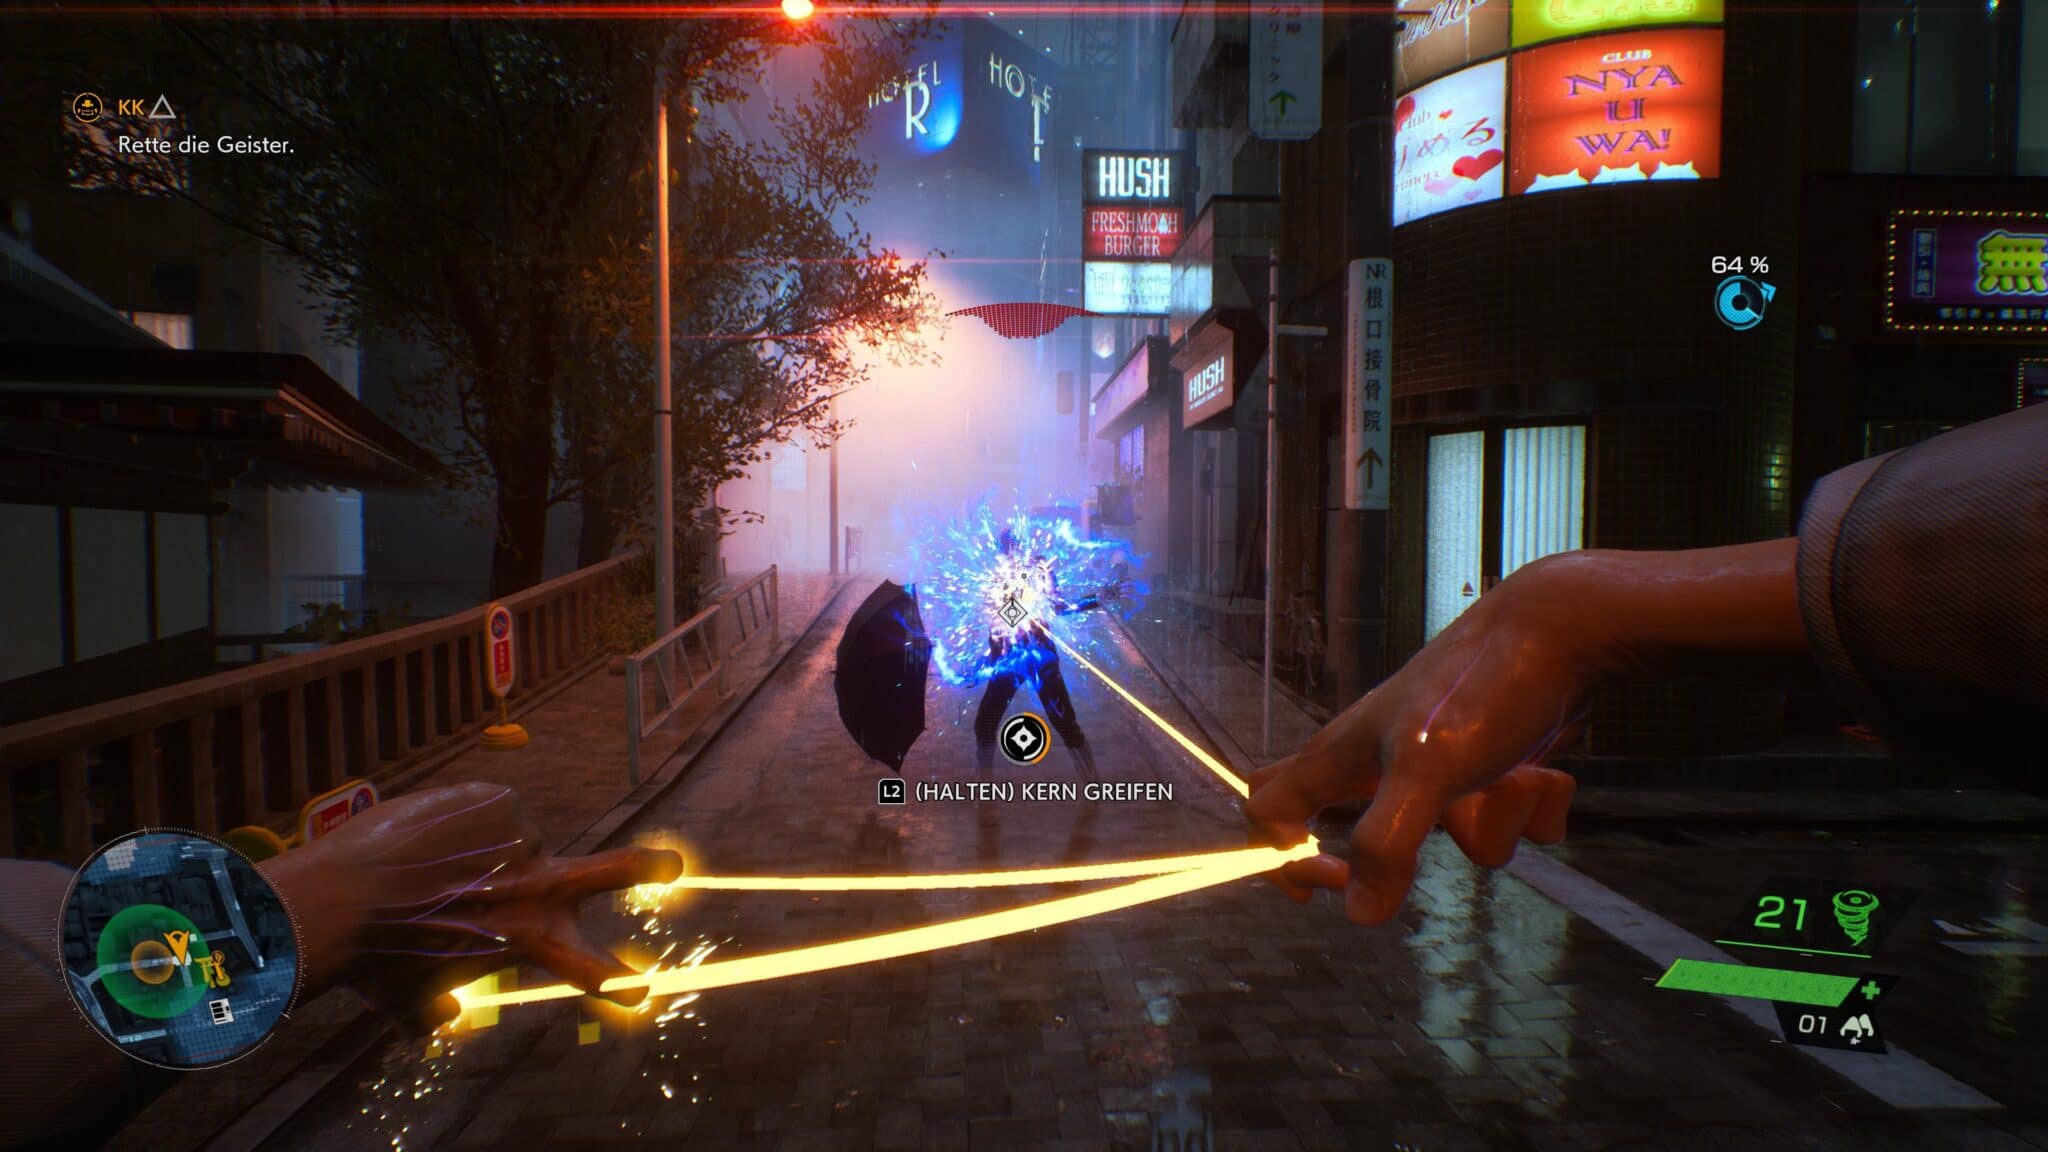 Ghostwire Tokyo plays like a first-person shooter at its core. But once you've weakened enemies, you can absorb their cores to regain ammo.